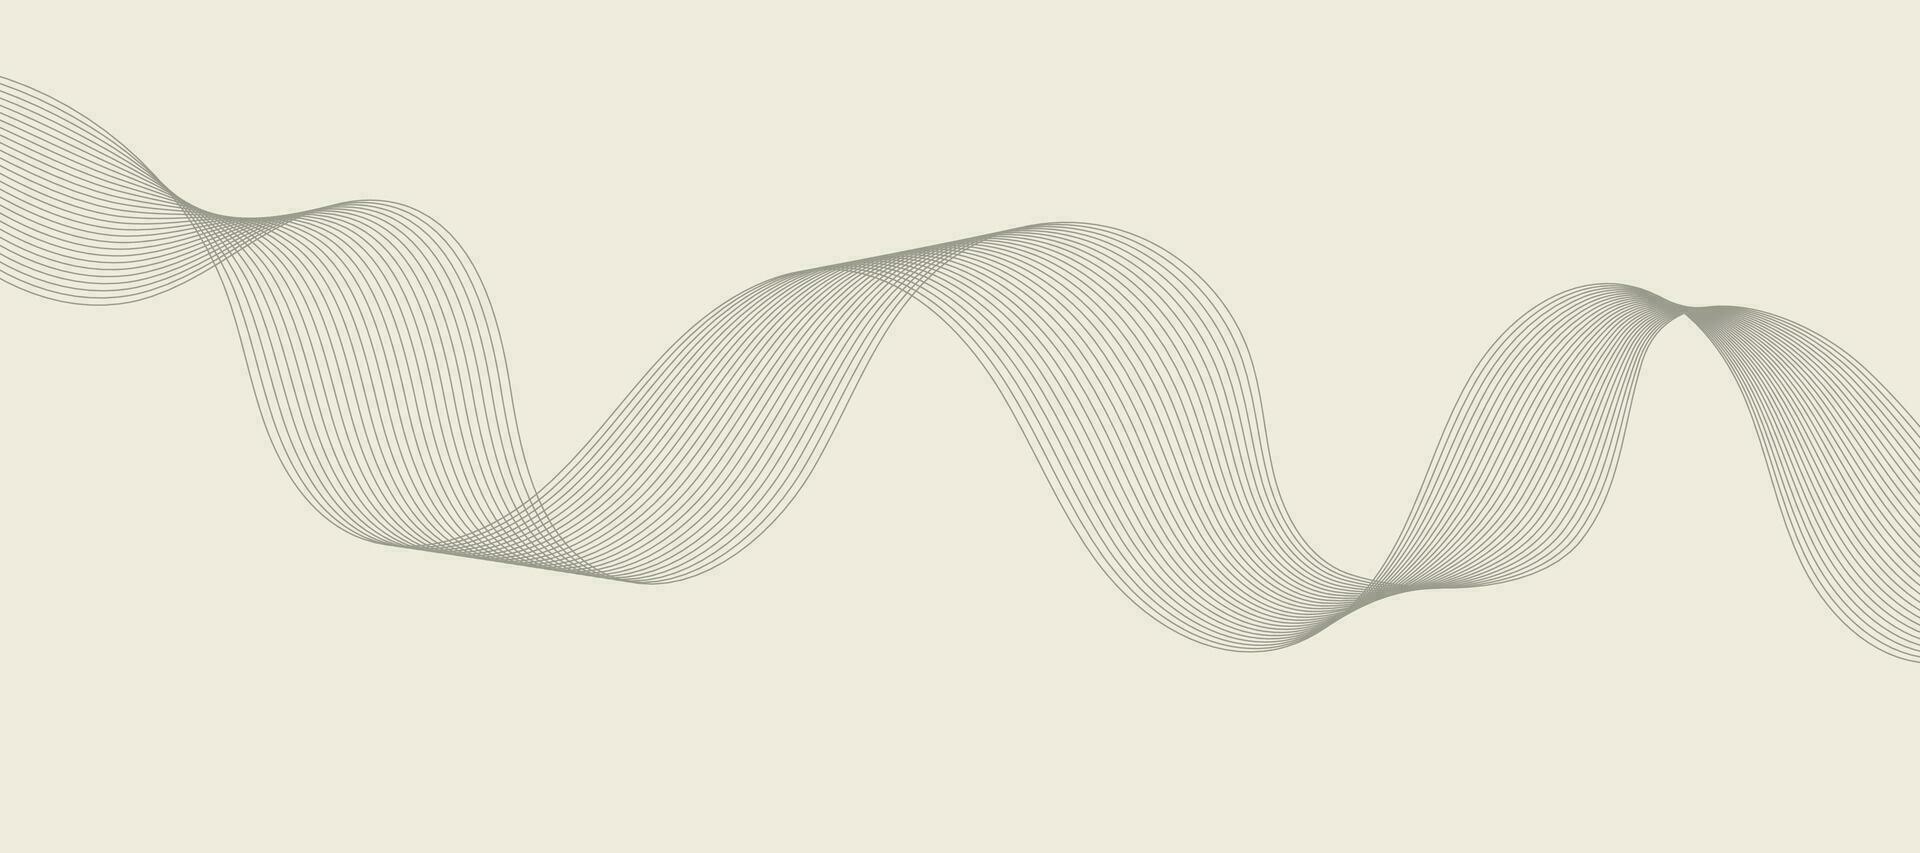 Abstract wave element for design. Digital frequency track equalizer. Stylized line art background. Vector illustration. Wave with lines created using blend tool. Curved Wavy Line, Smooth Stripe.